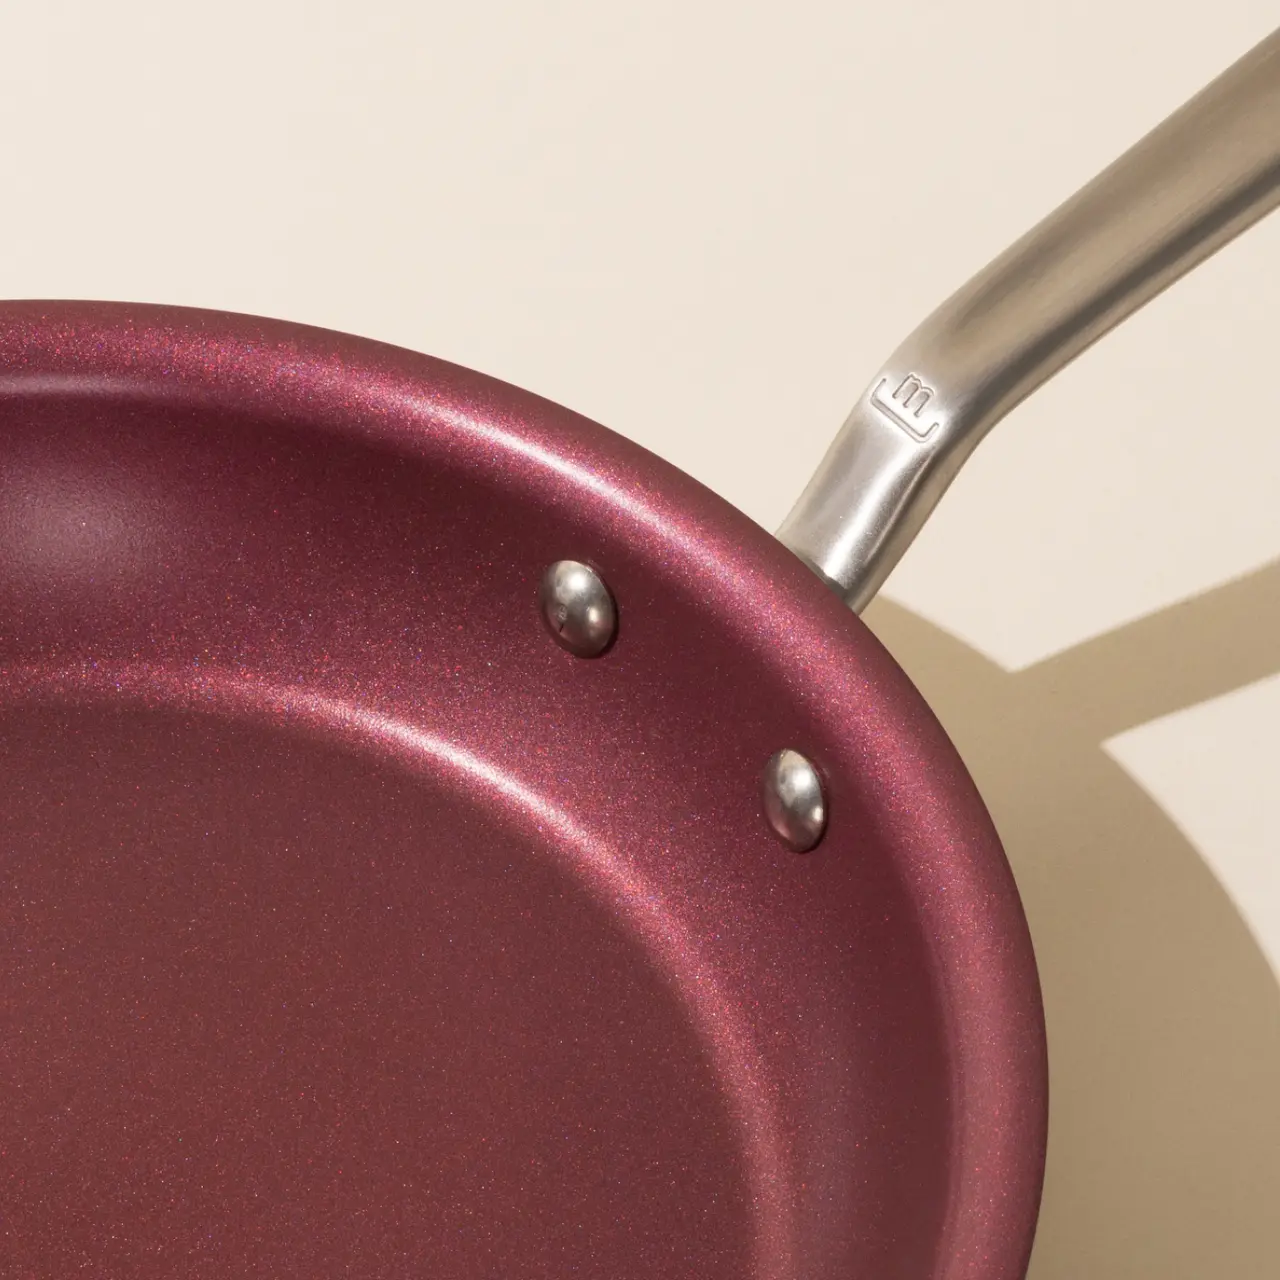 A close-up of a maroon non-stick frying pan with a silver handle, highlighting the smooth surface and two rivets attaching the handle.